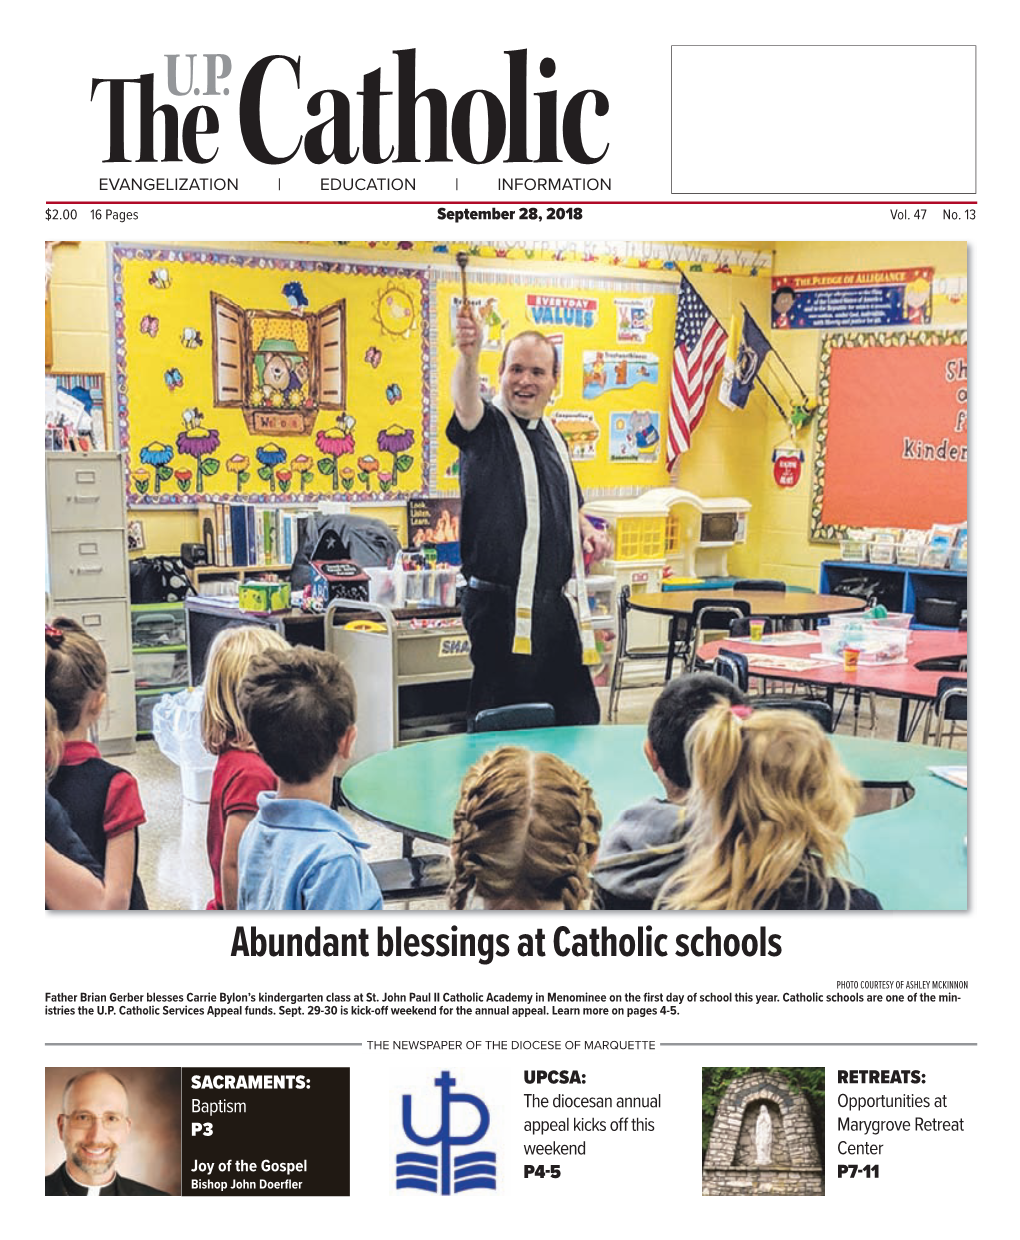 Abundant Blessings at Catholic Schools PHOTO COURTESY of ASHLEY MCKINNON Father Brian Gerber Blesses Carrie Bylon’S Kindergarten Class at St